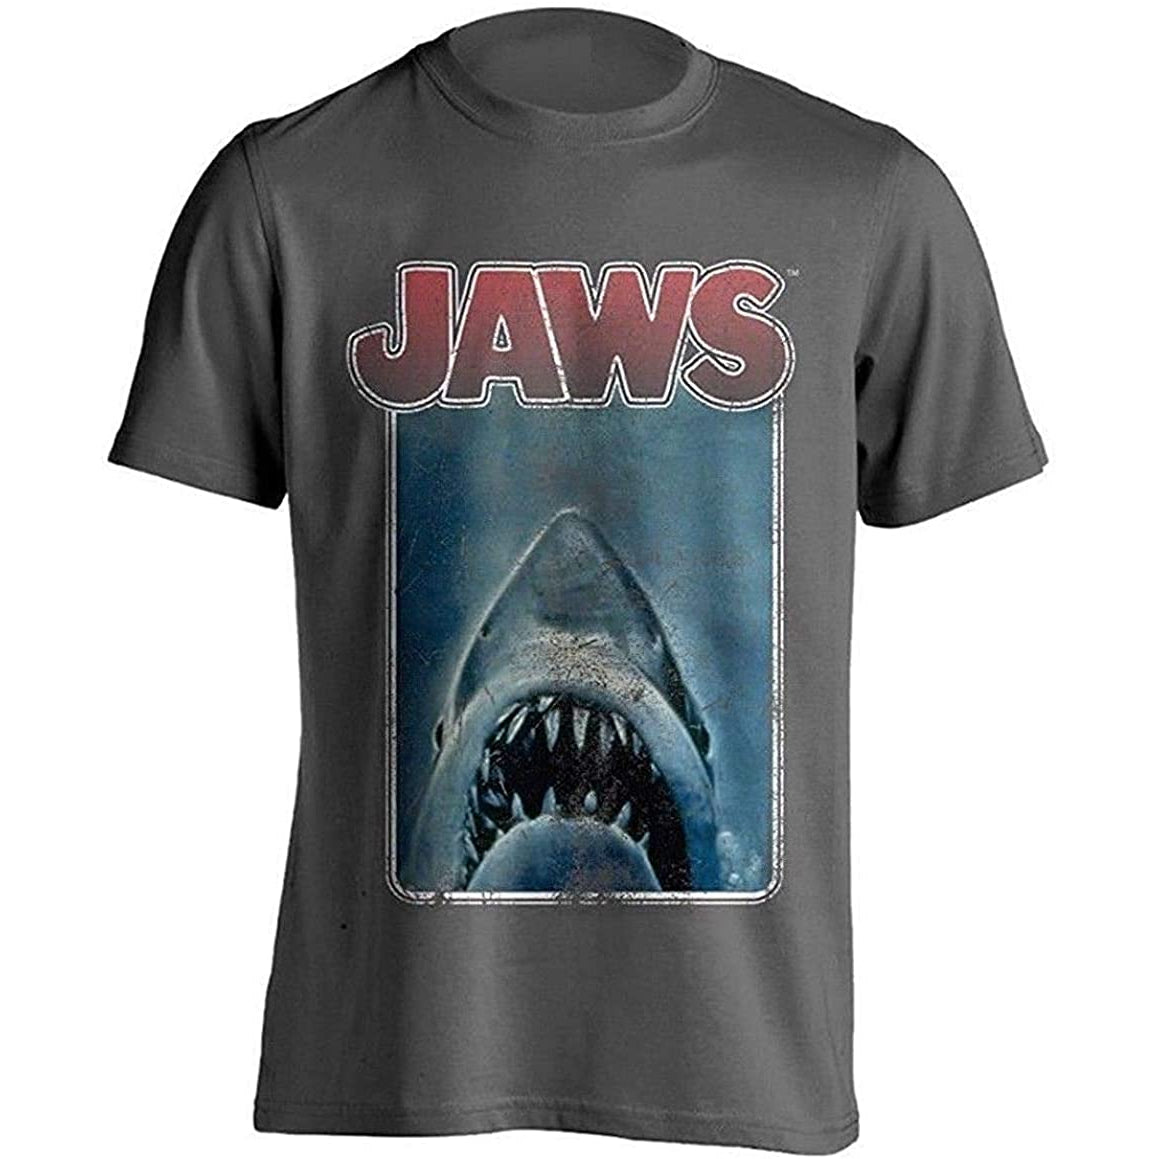 Jaws - Distressed Poster - Official Mens T Shirt - XL